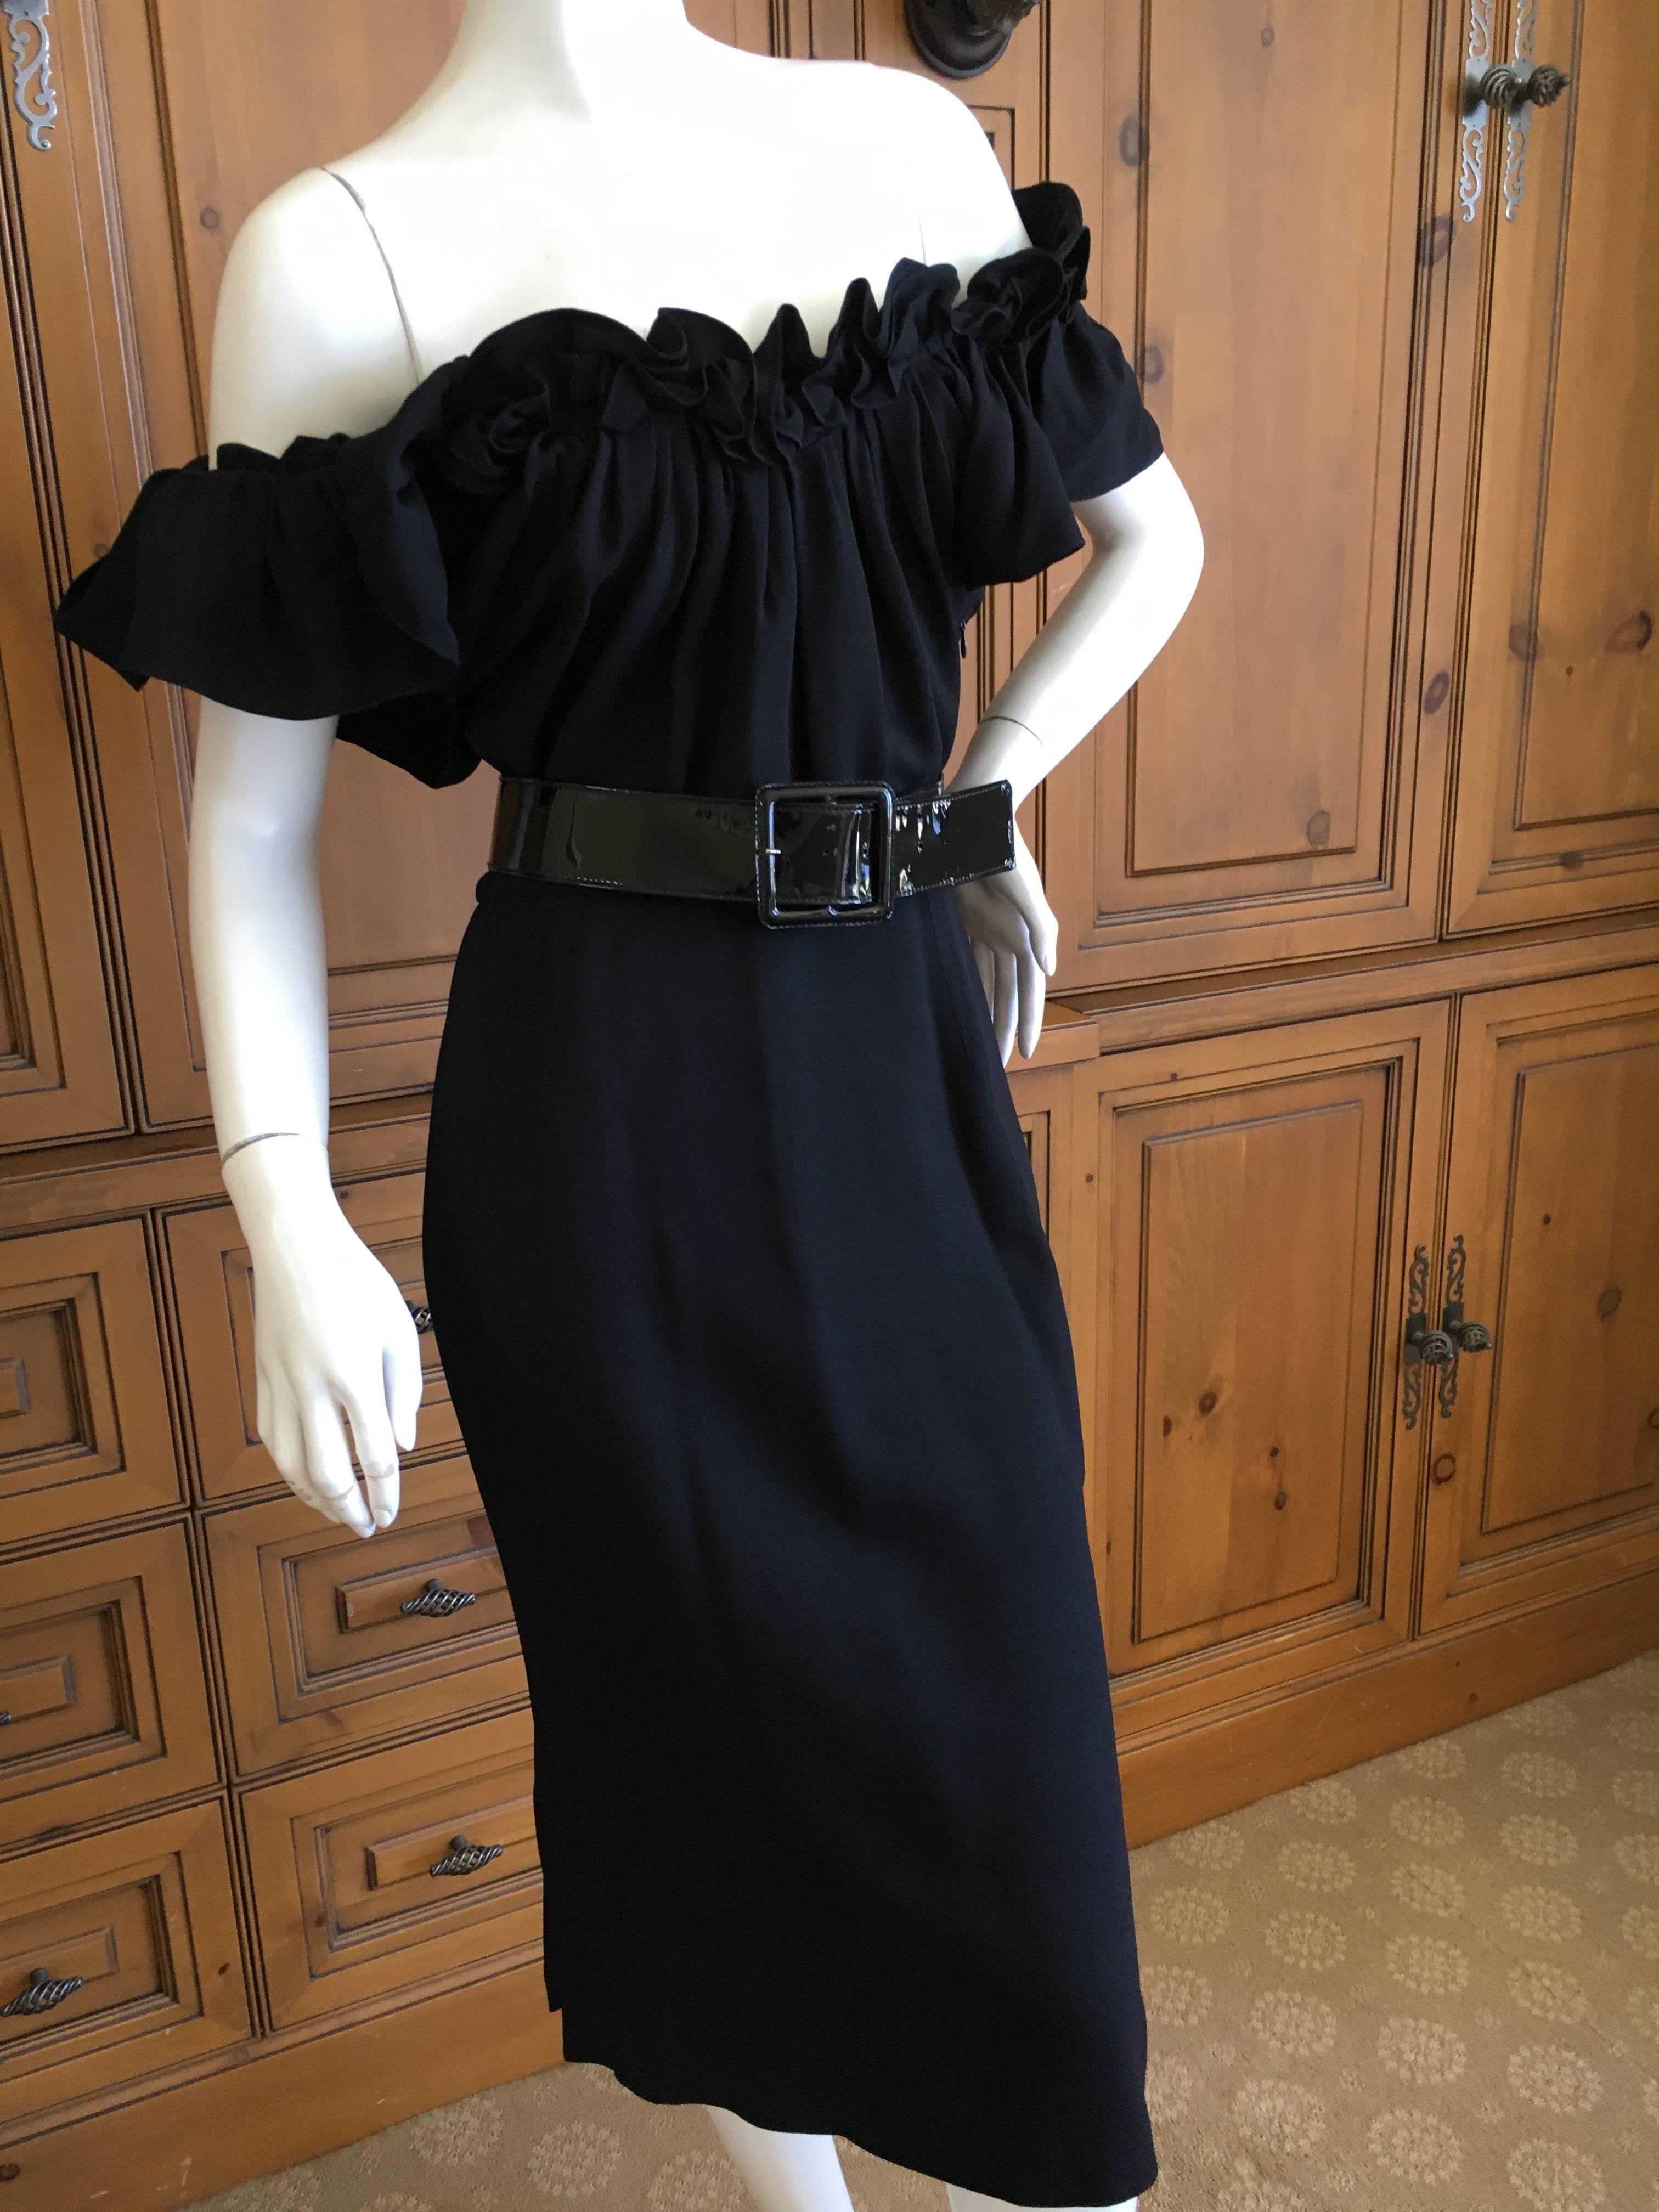 Christian Dior by John Galliano Little Black Dress with Off the Shoulder Ruffle In Excellent Condition For Sale In Cloverdale, CA